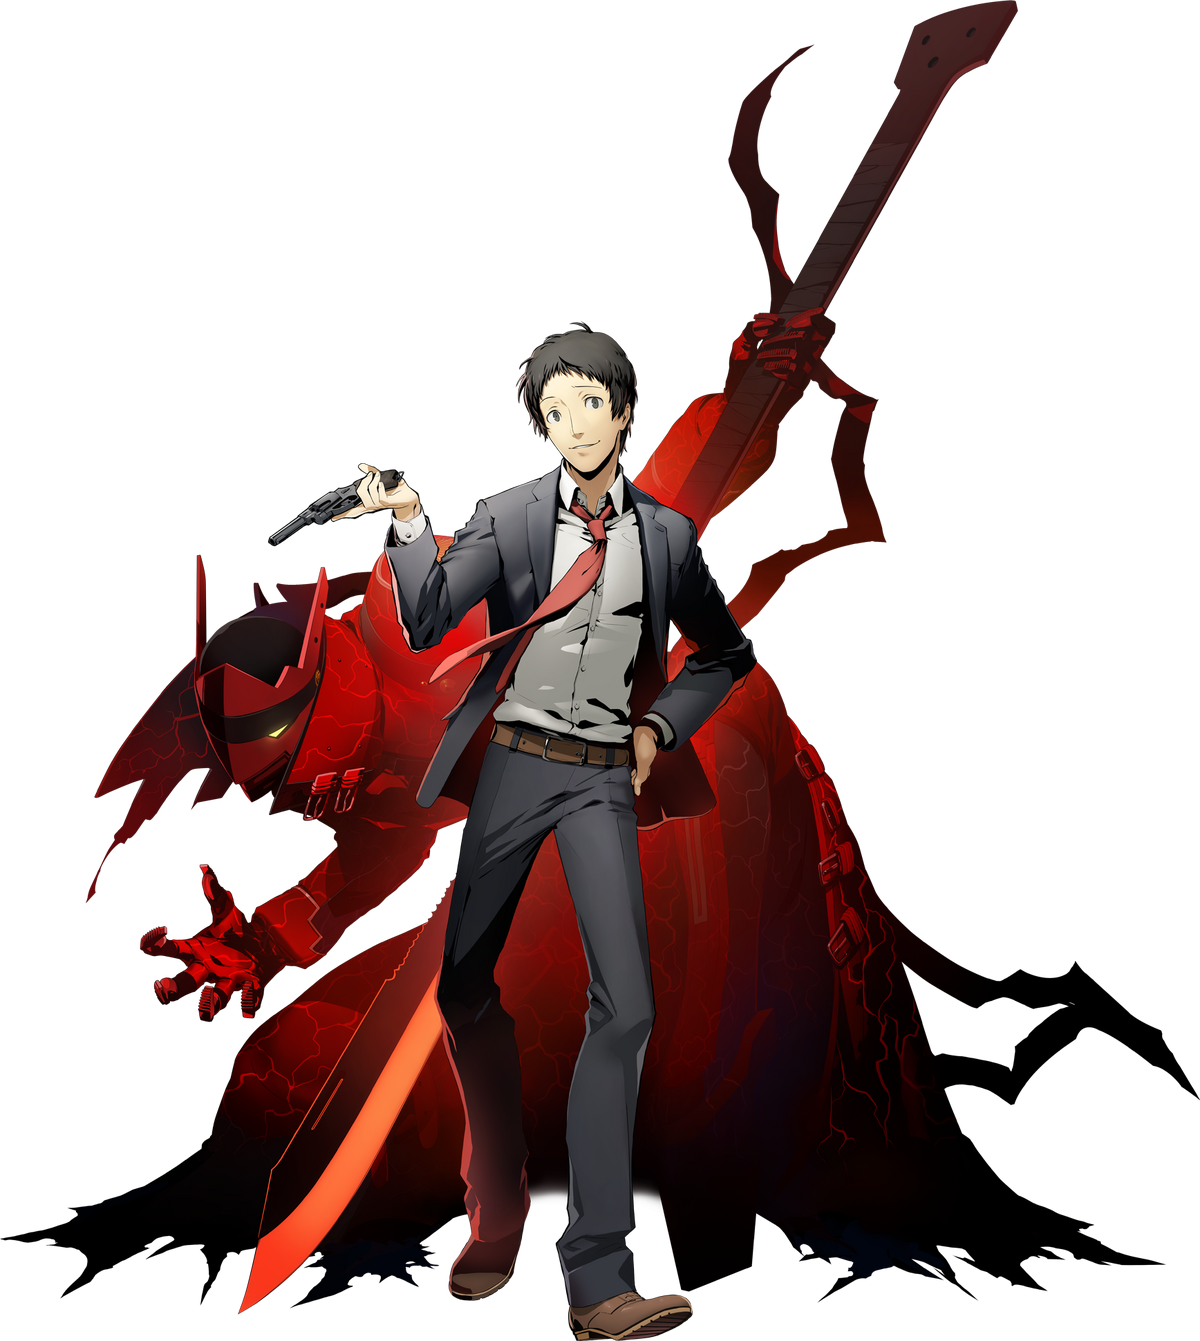 My little collection so far! Wondering what people think of Adachi